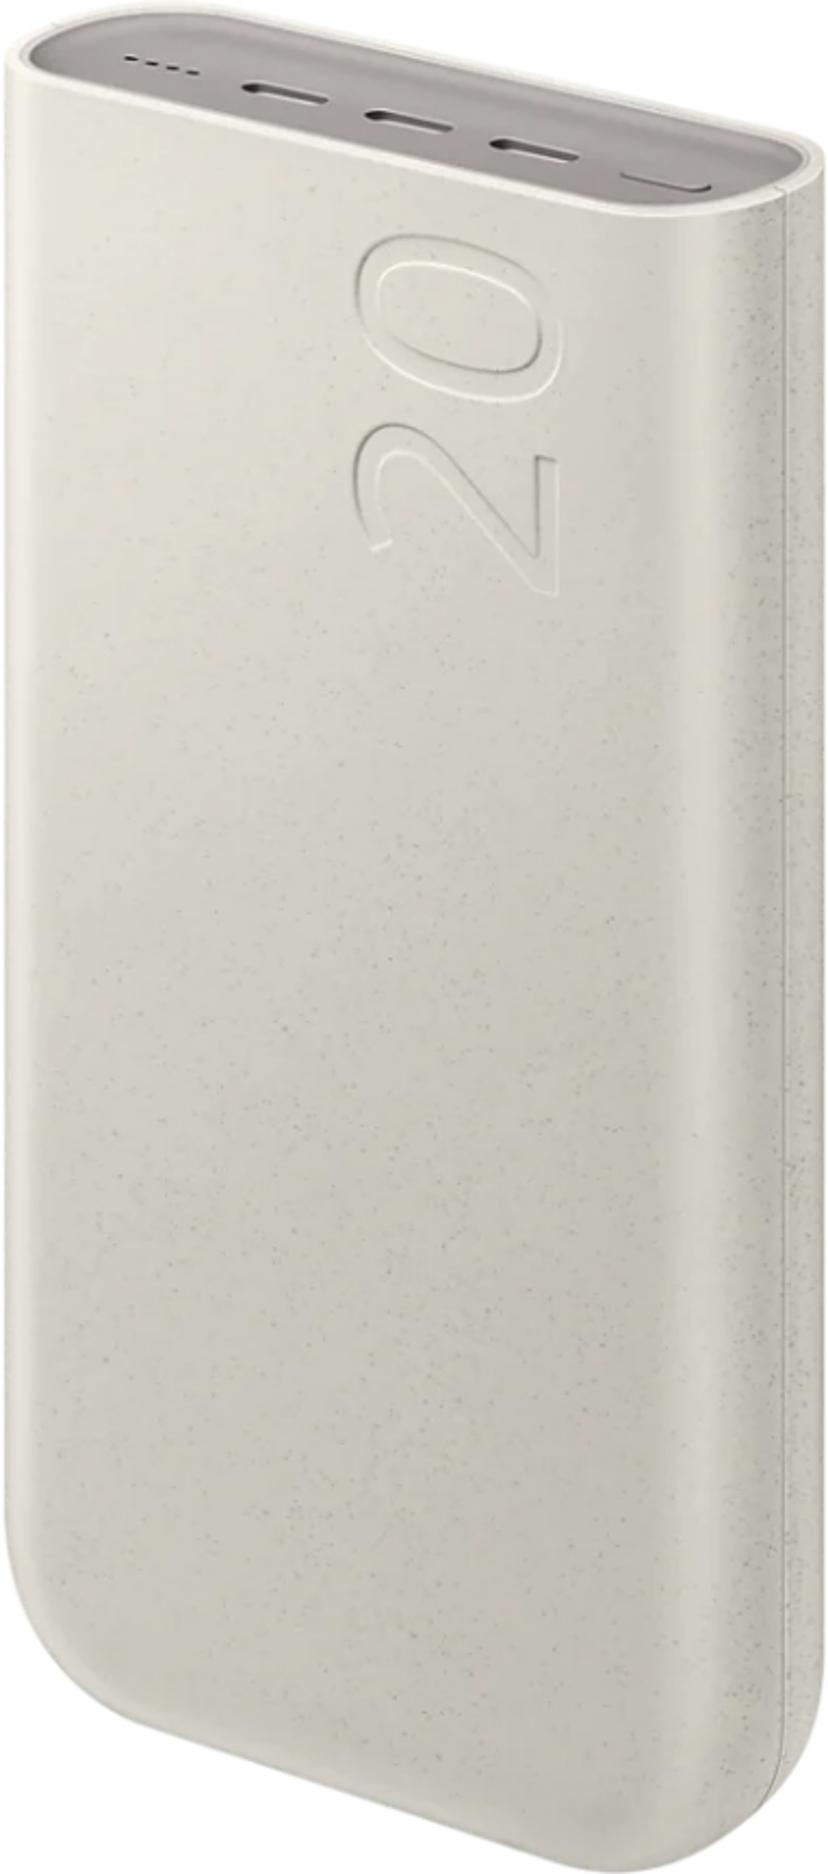 Samsung Portable Battery Pack 20000milliampere hour 5A Beige